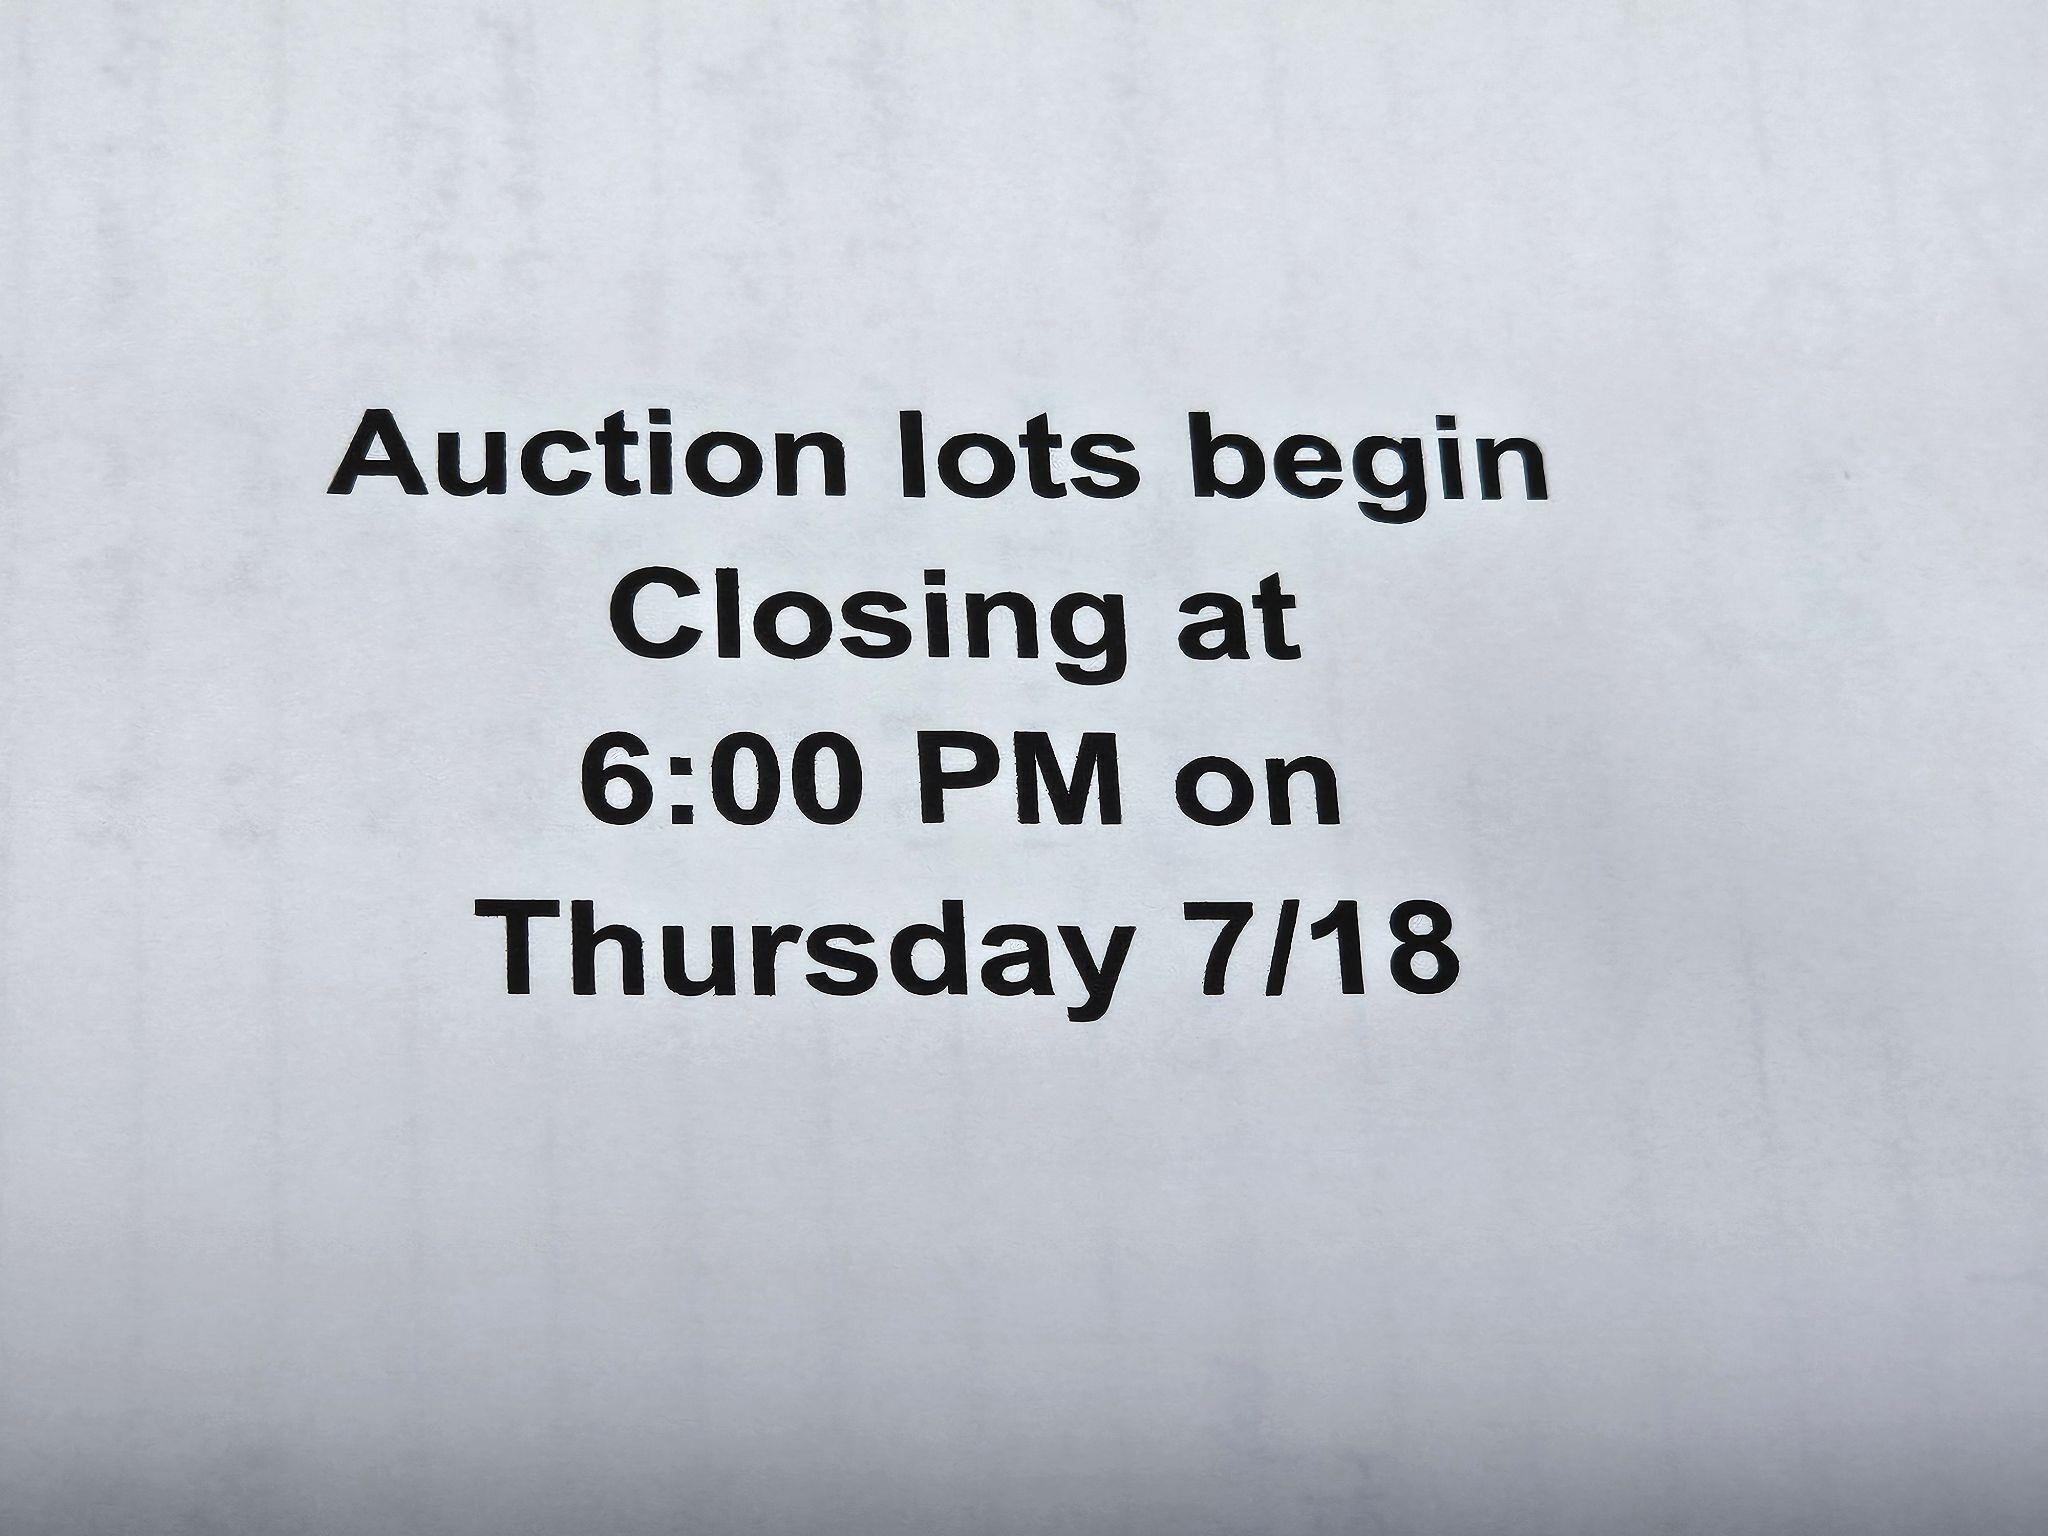 Auction lots begin closing @ 6:00 PM on 7/18